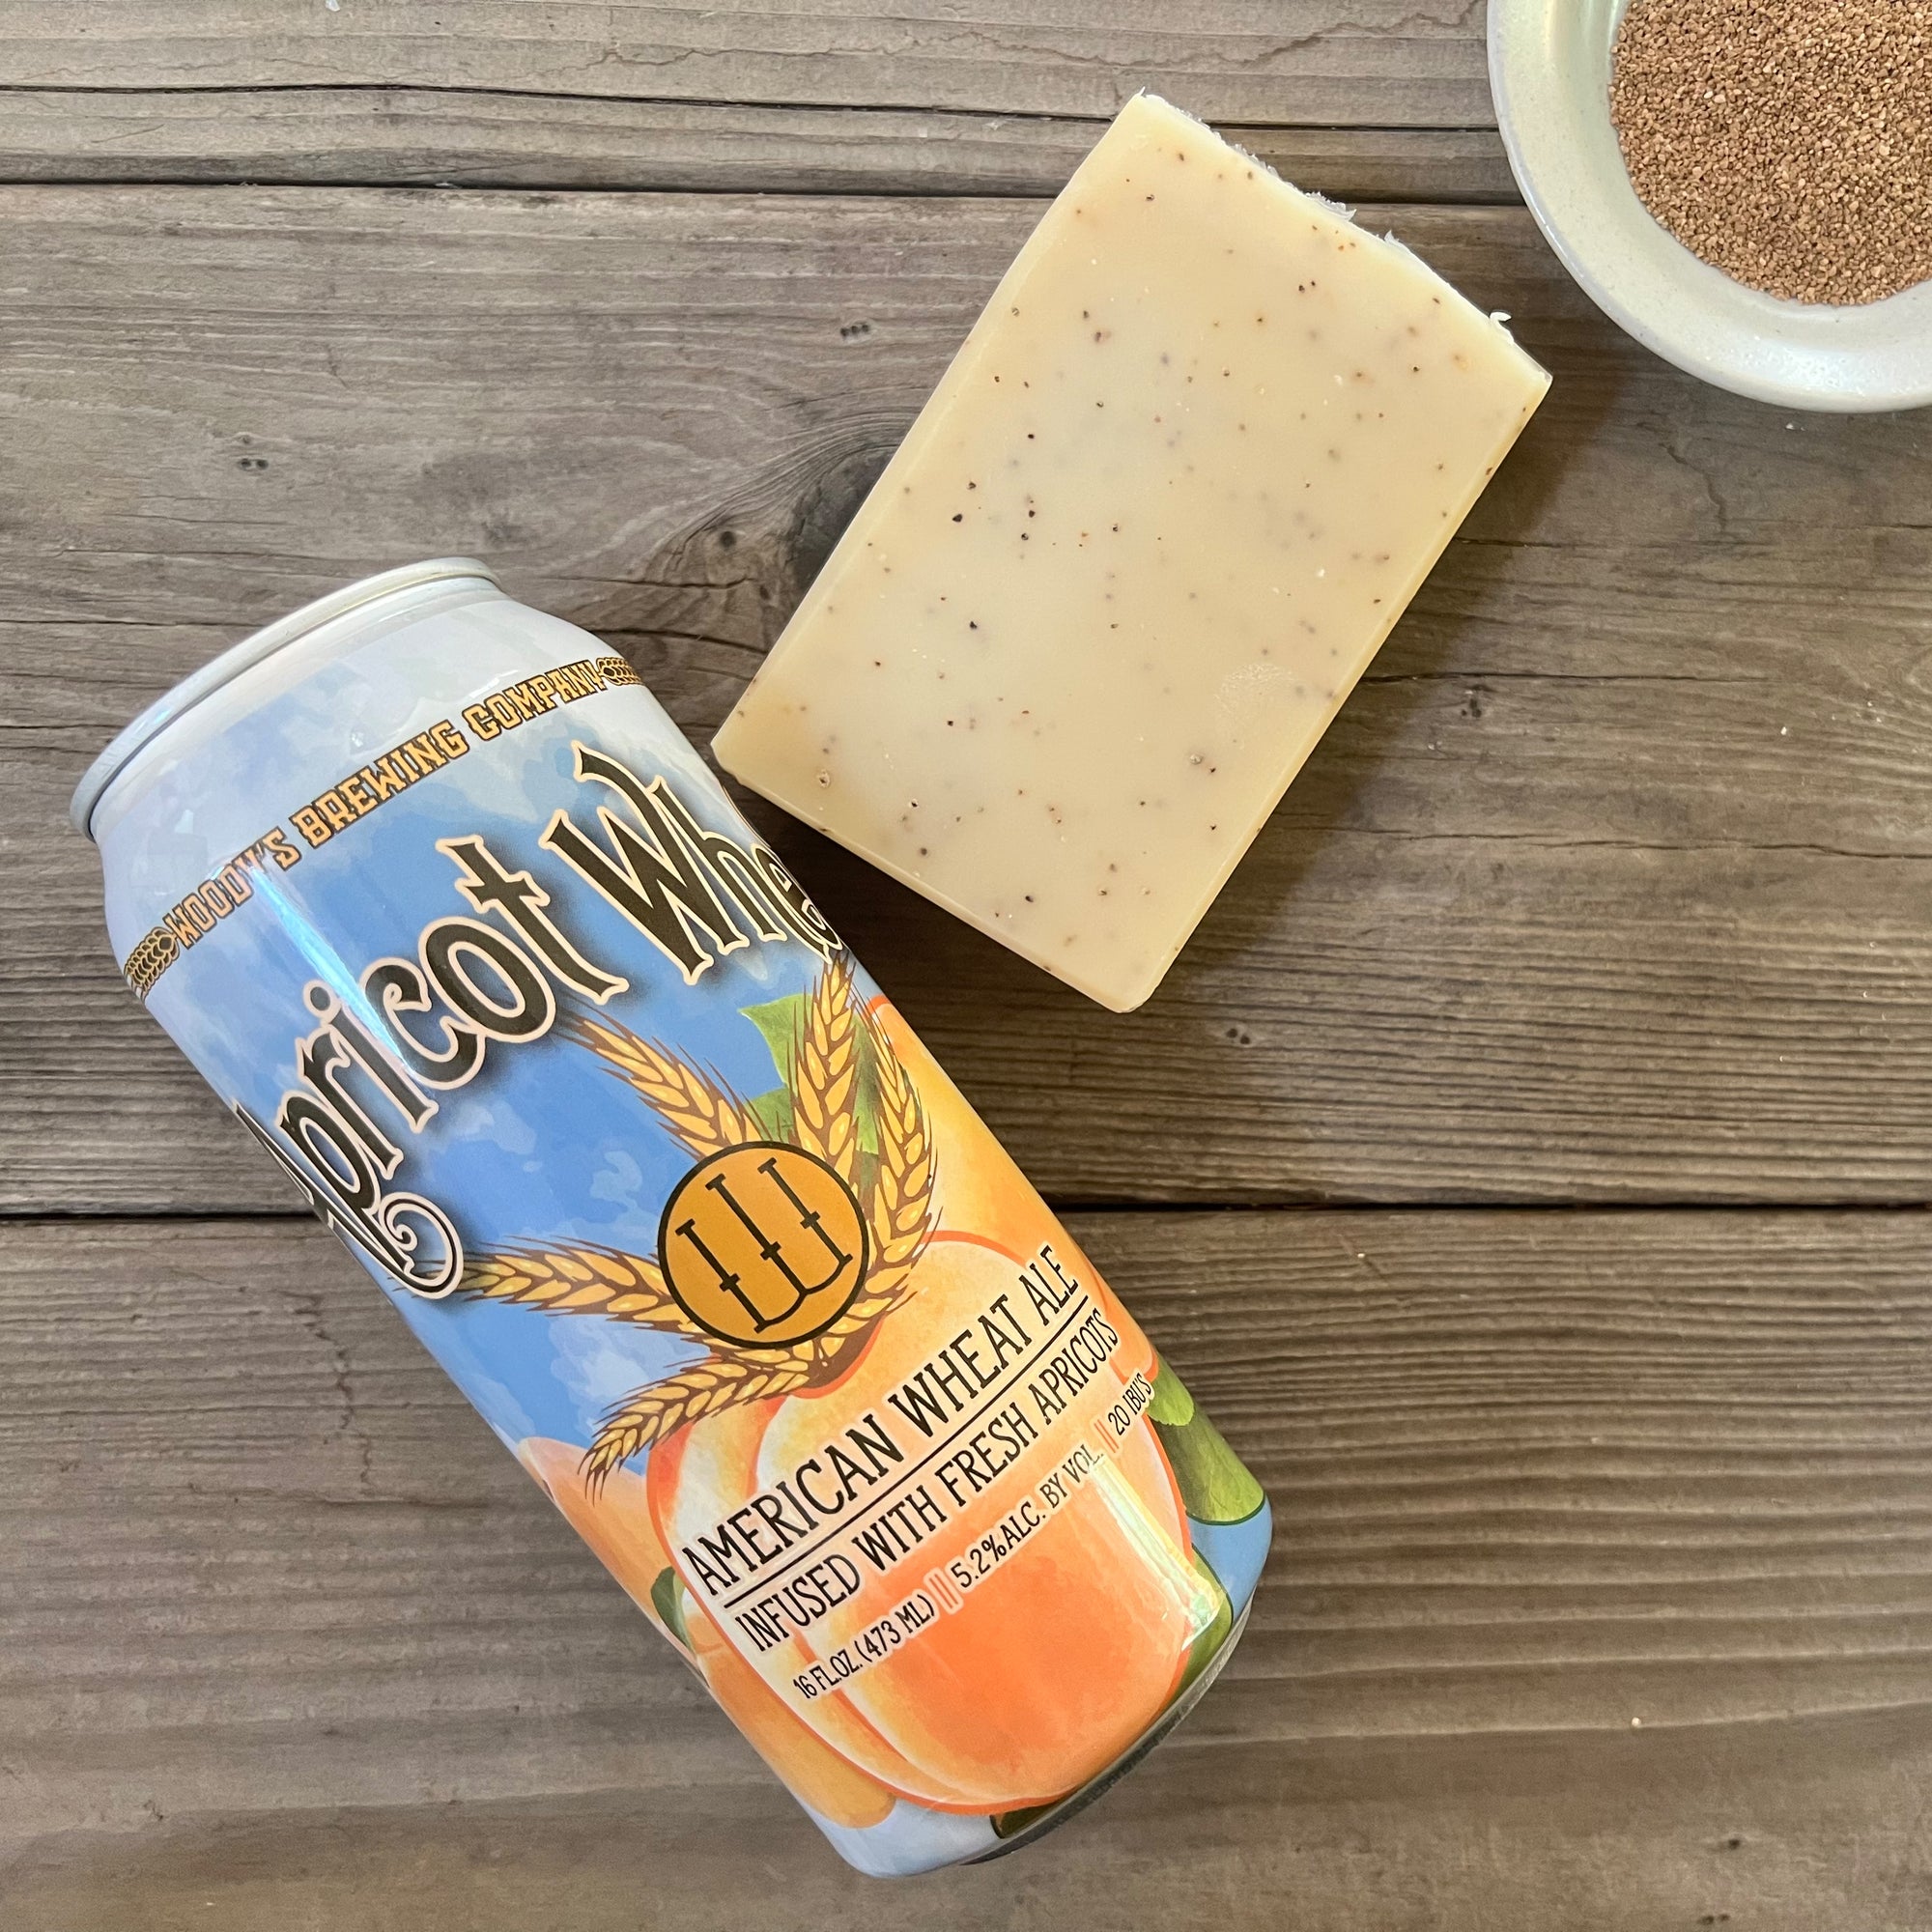 October Soap of The Month - Apricot Wheat Beer